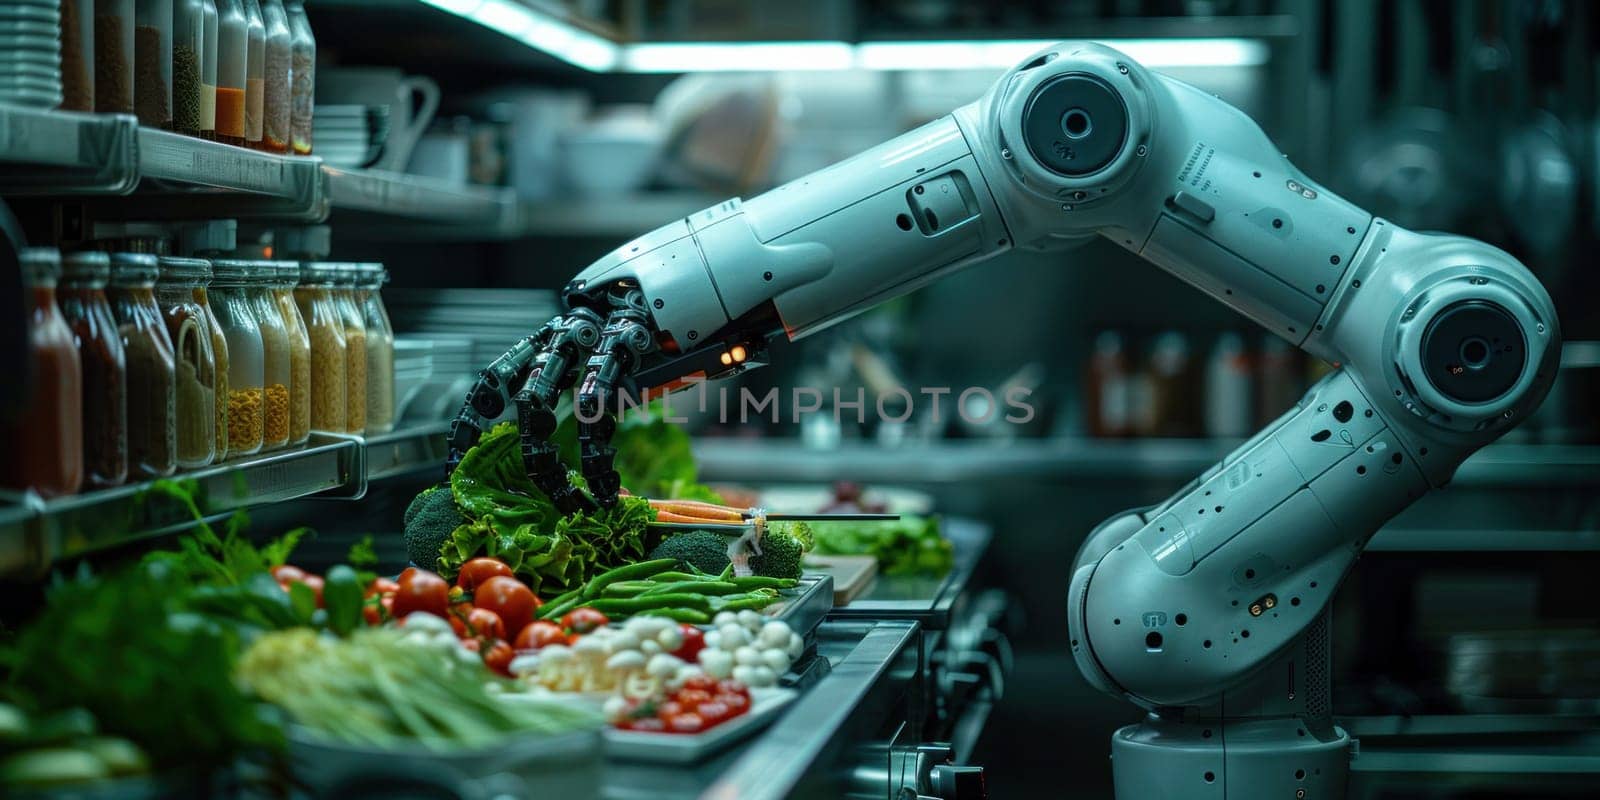 A robot is positioned in front of a selection of food items, ready for interaction or consumption.